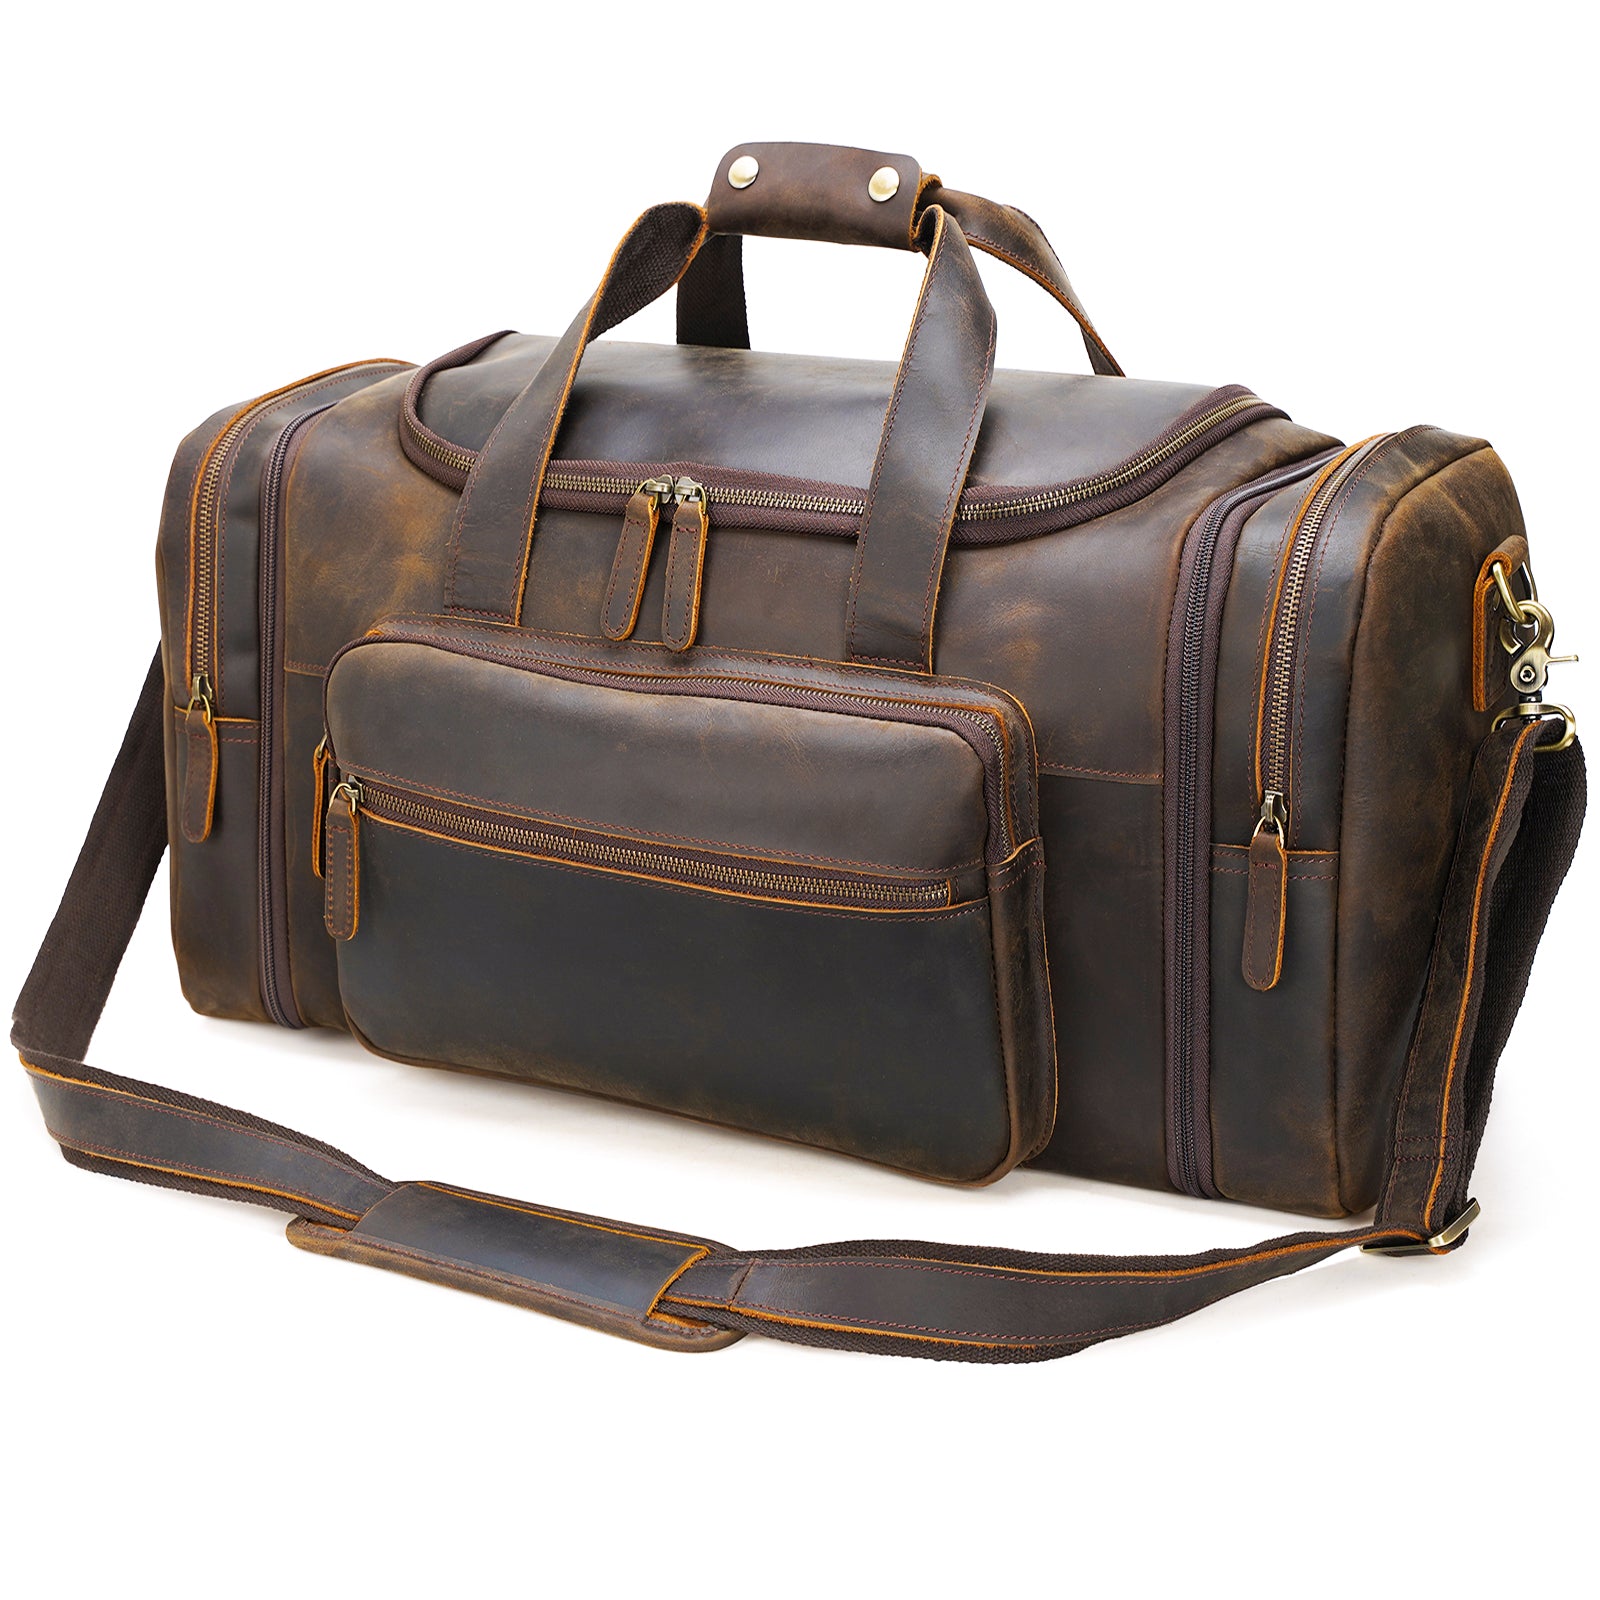 Polare 23 Full Grain Leather Weekender Travel Overnight Luggage Duffe